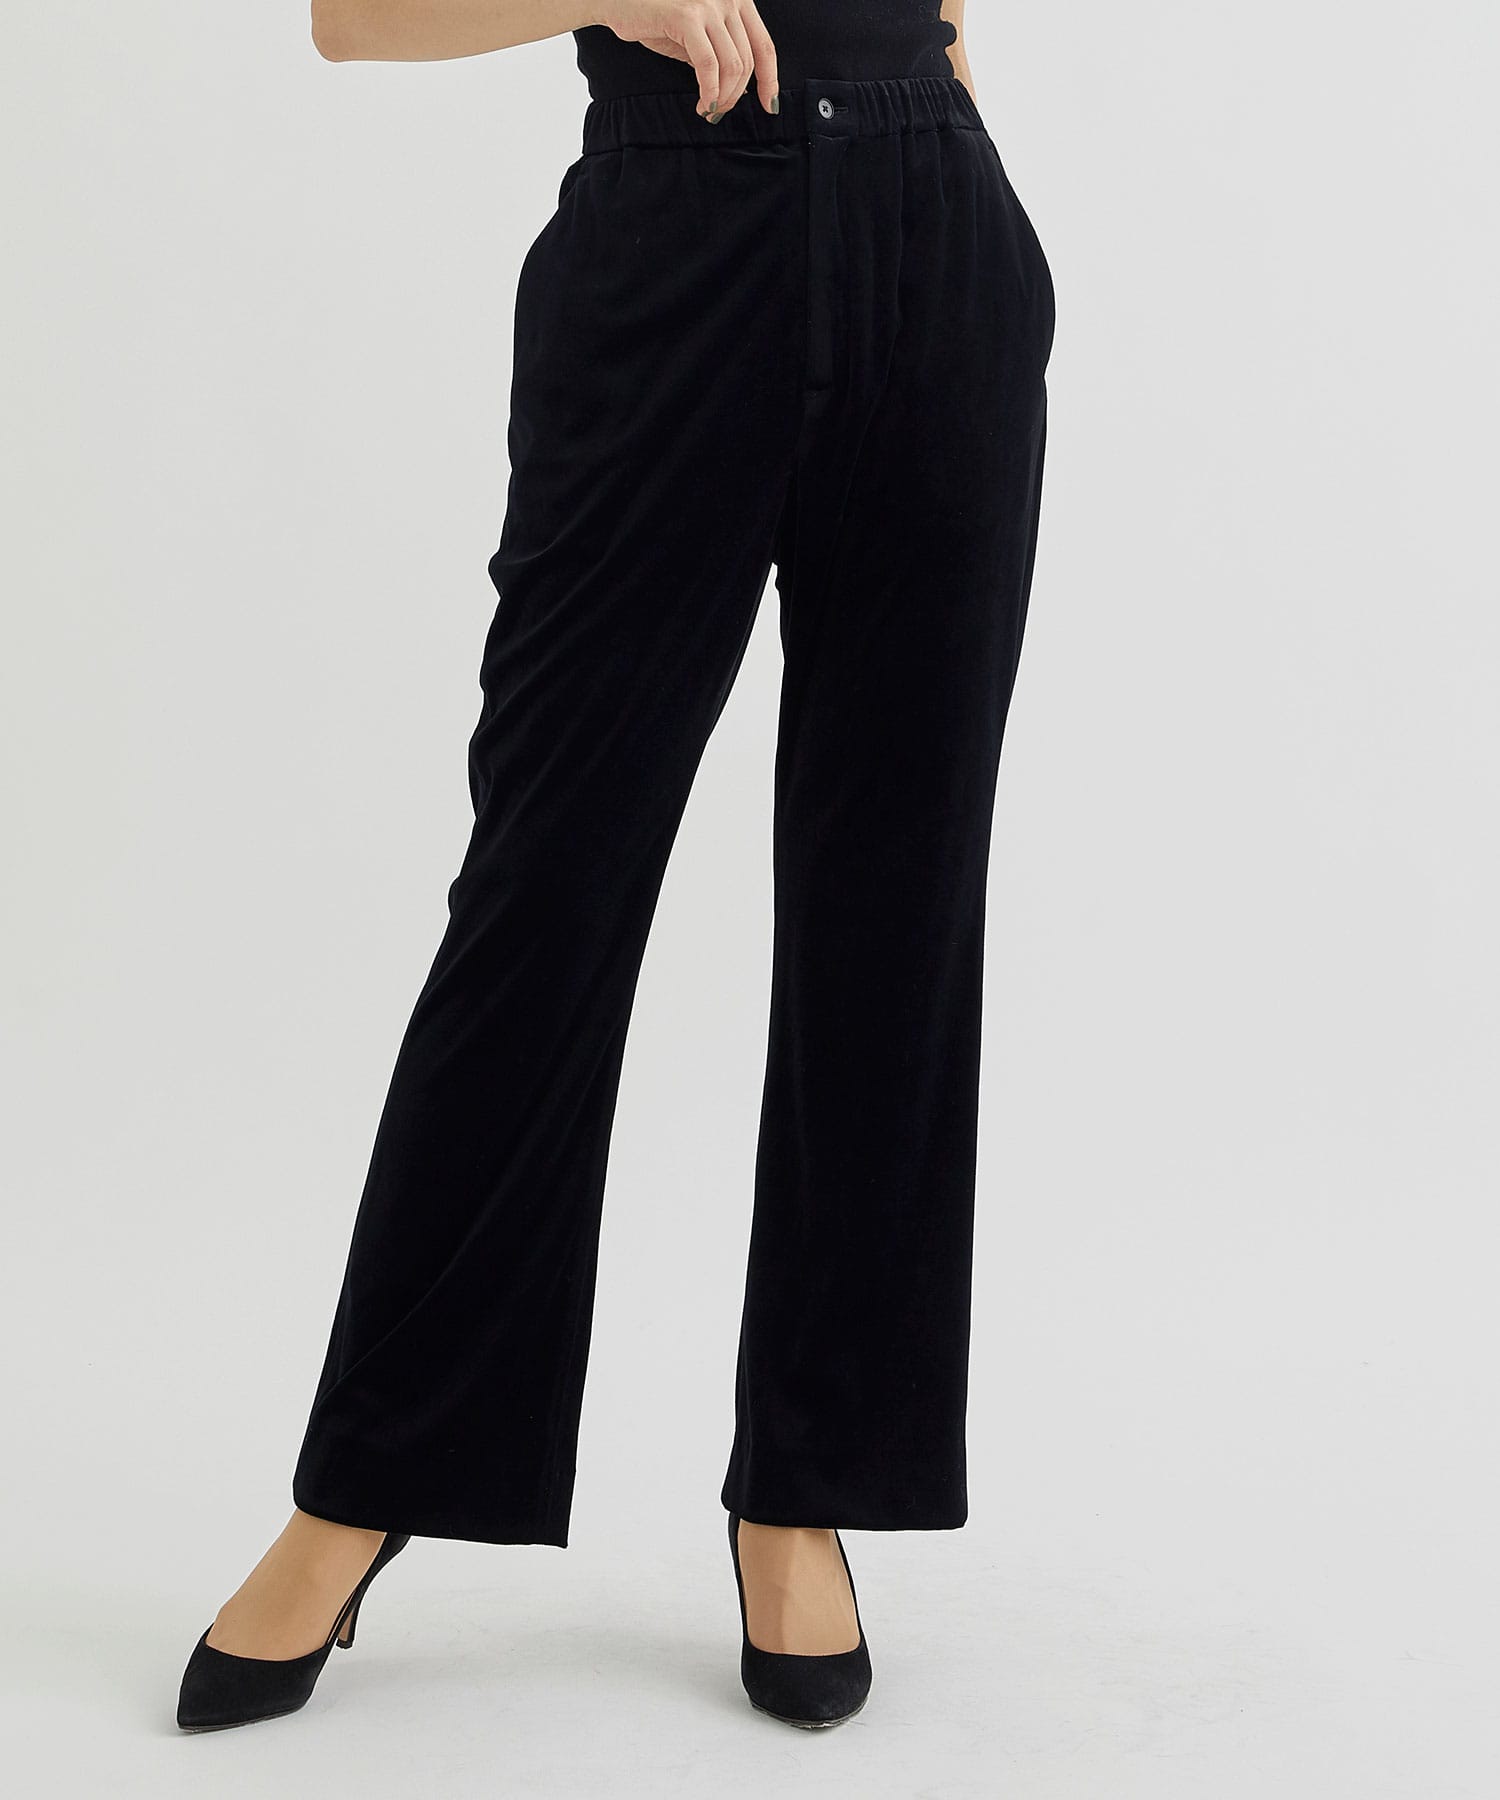 Stretch velour flared pants